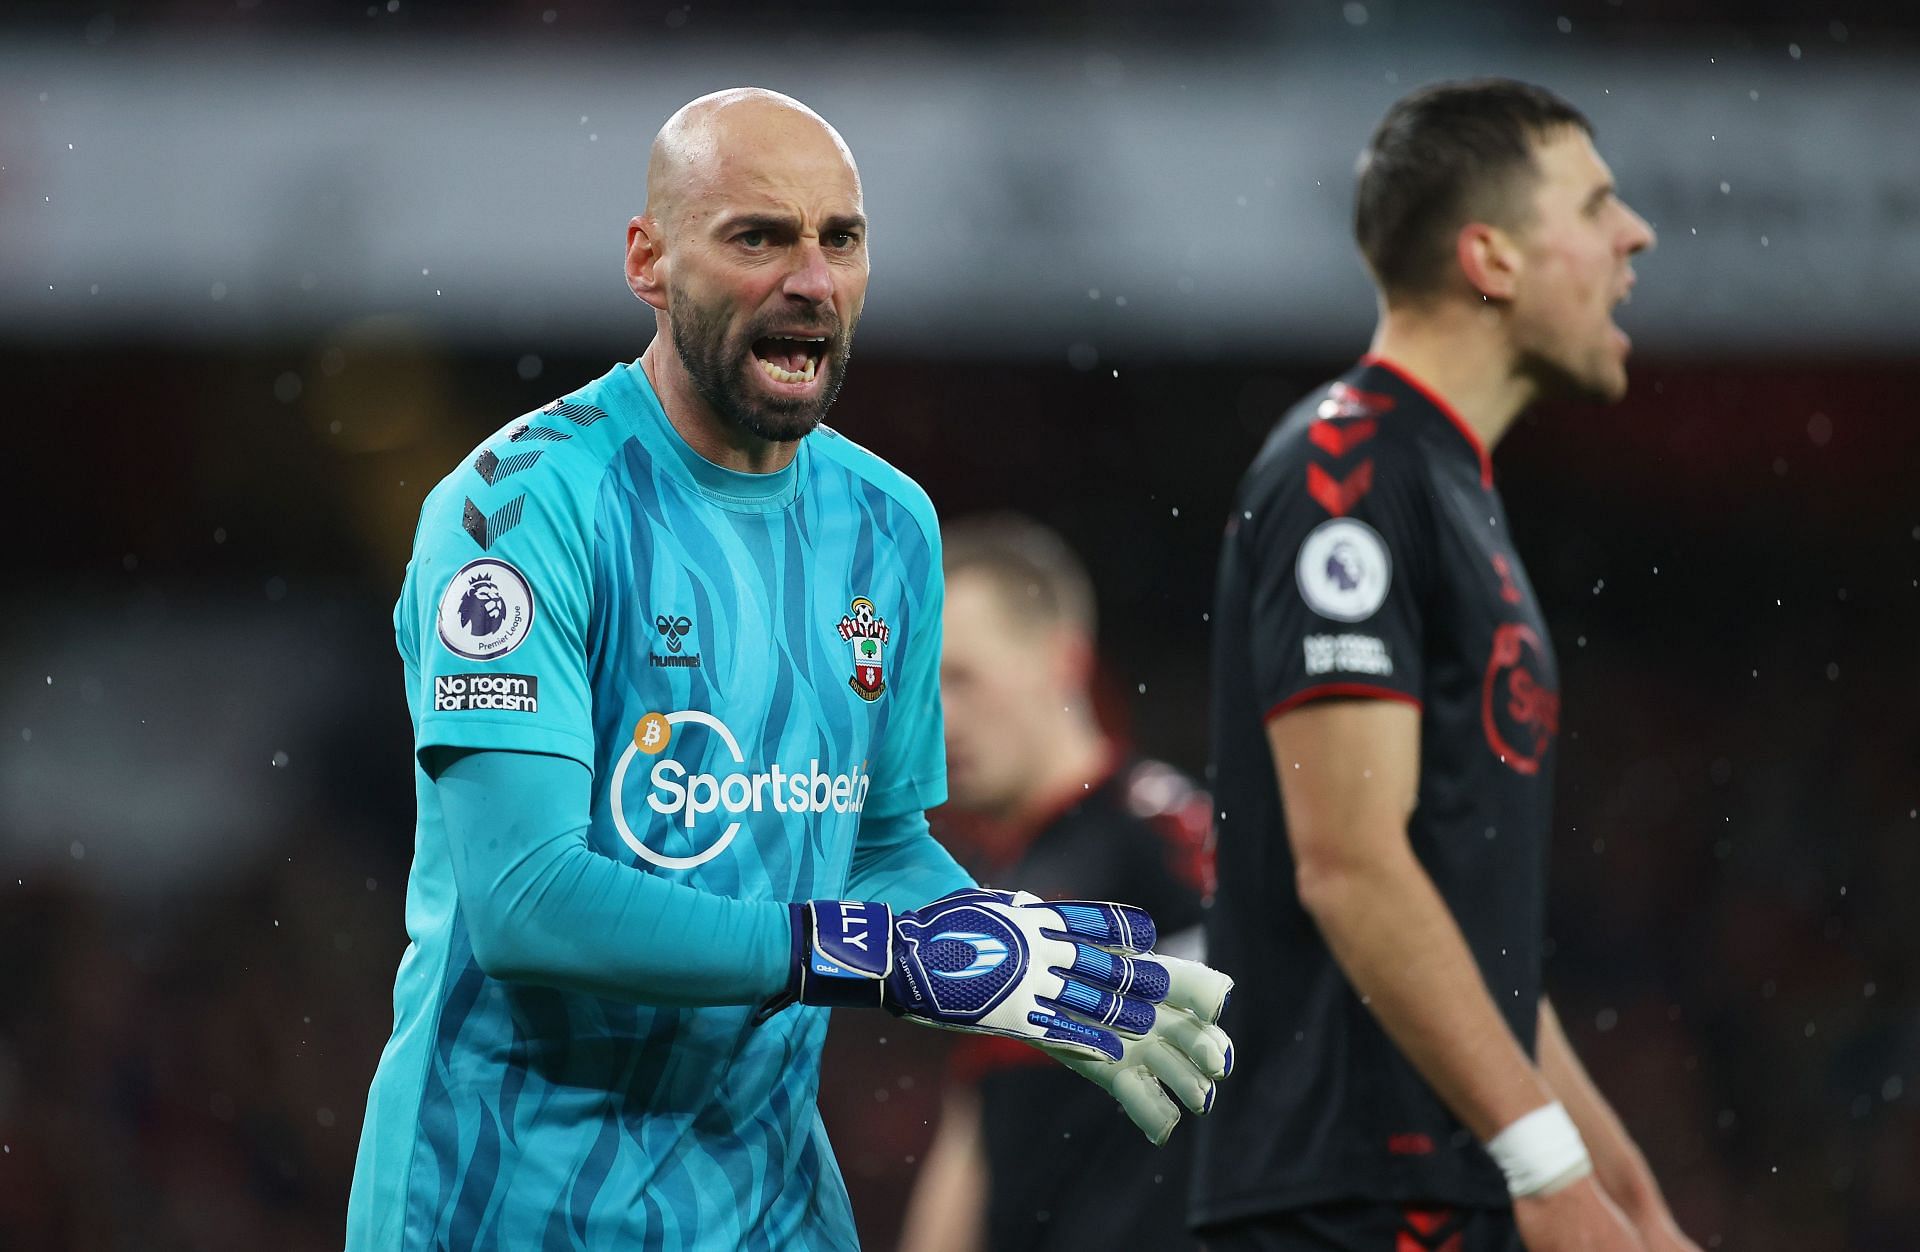 Willy Caballero is expected to stay in the Premier League for another season